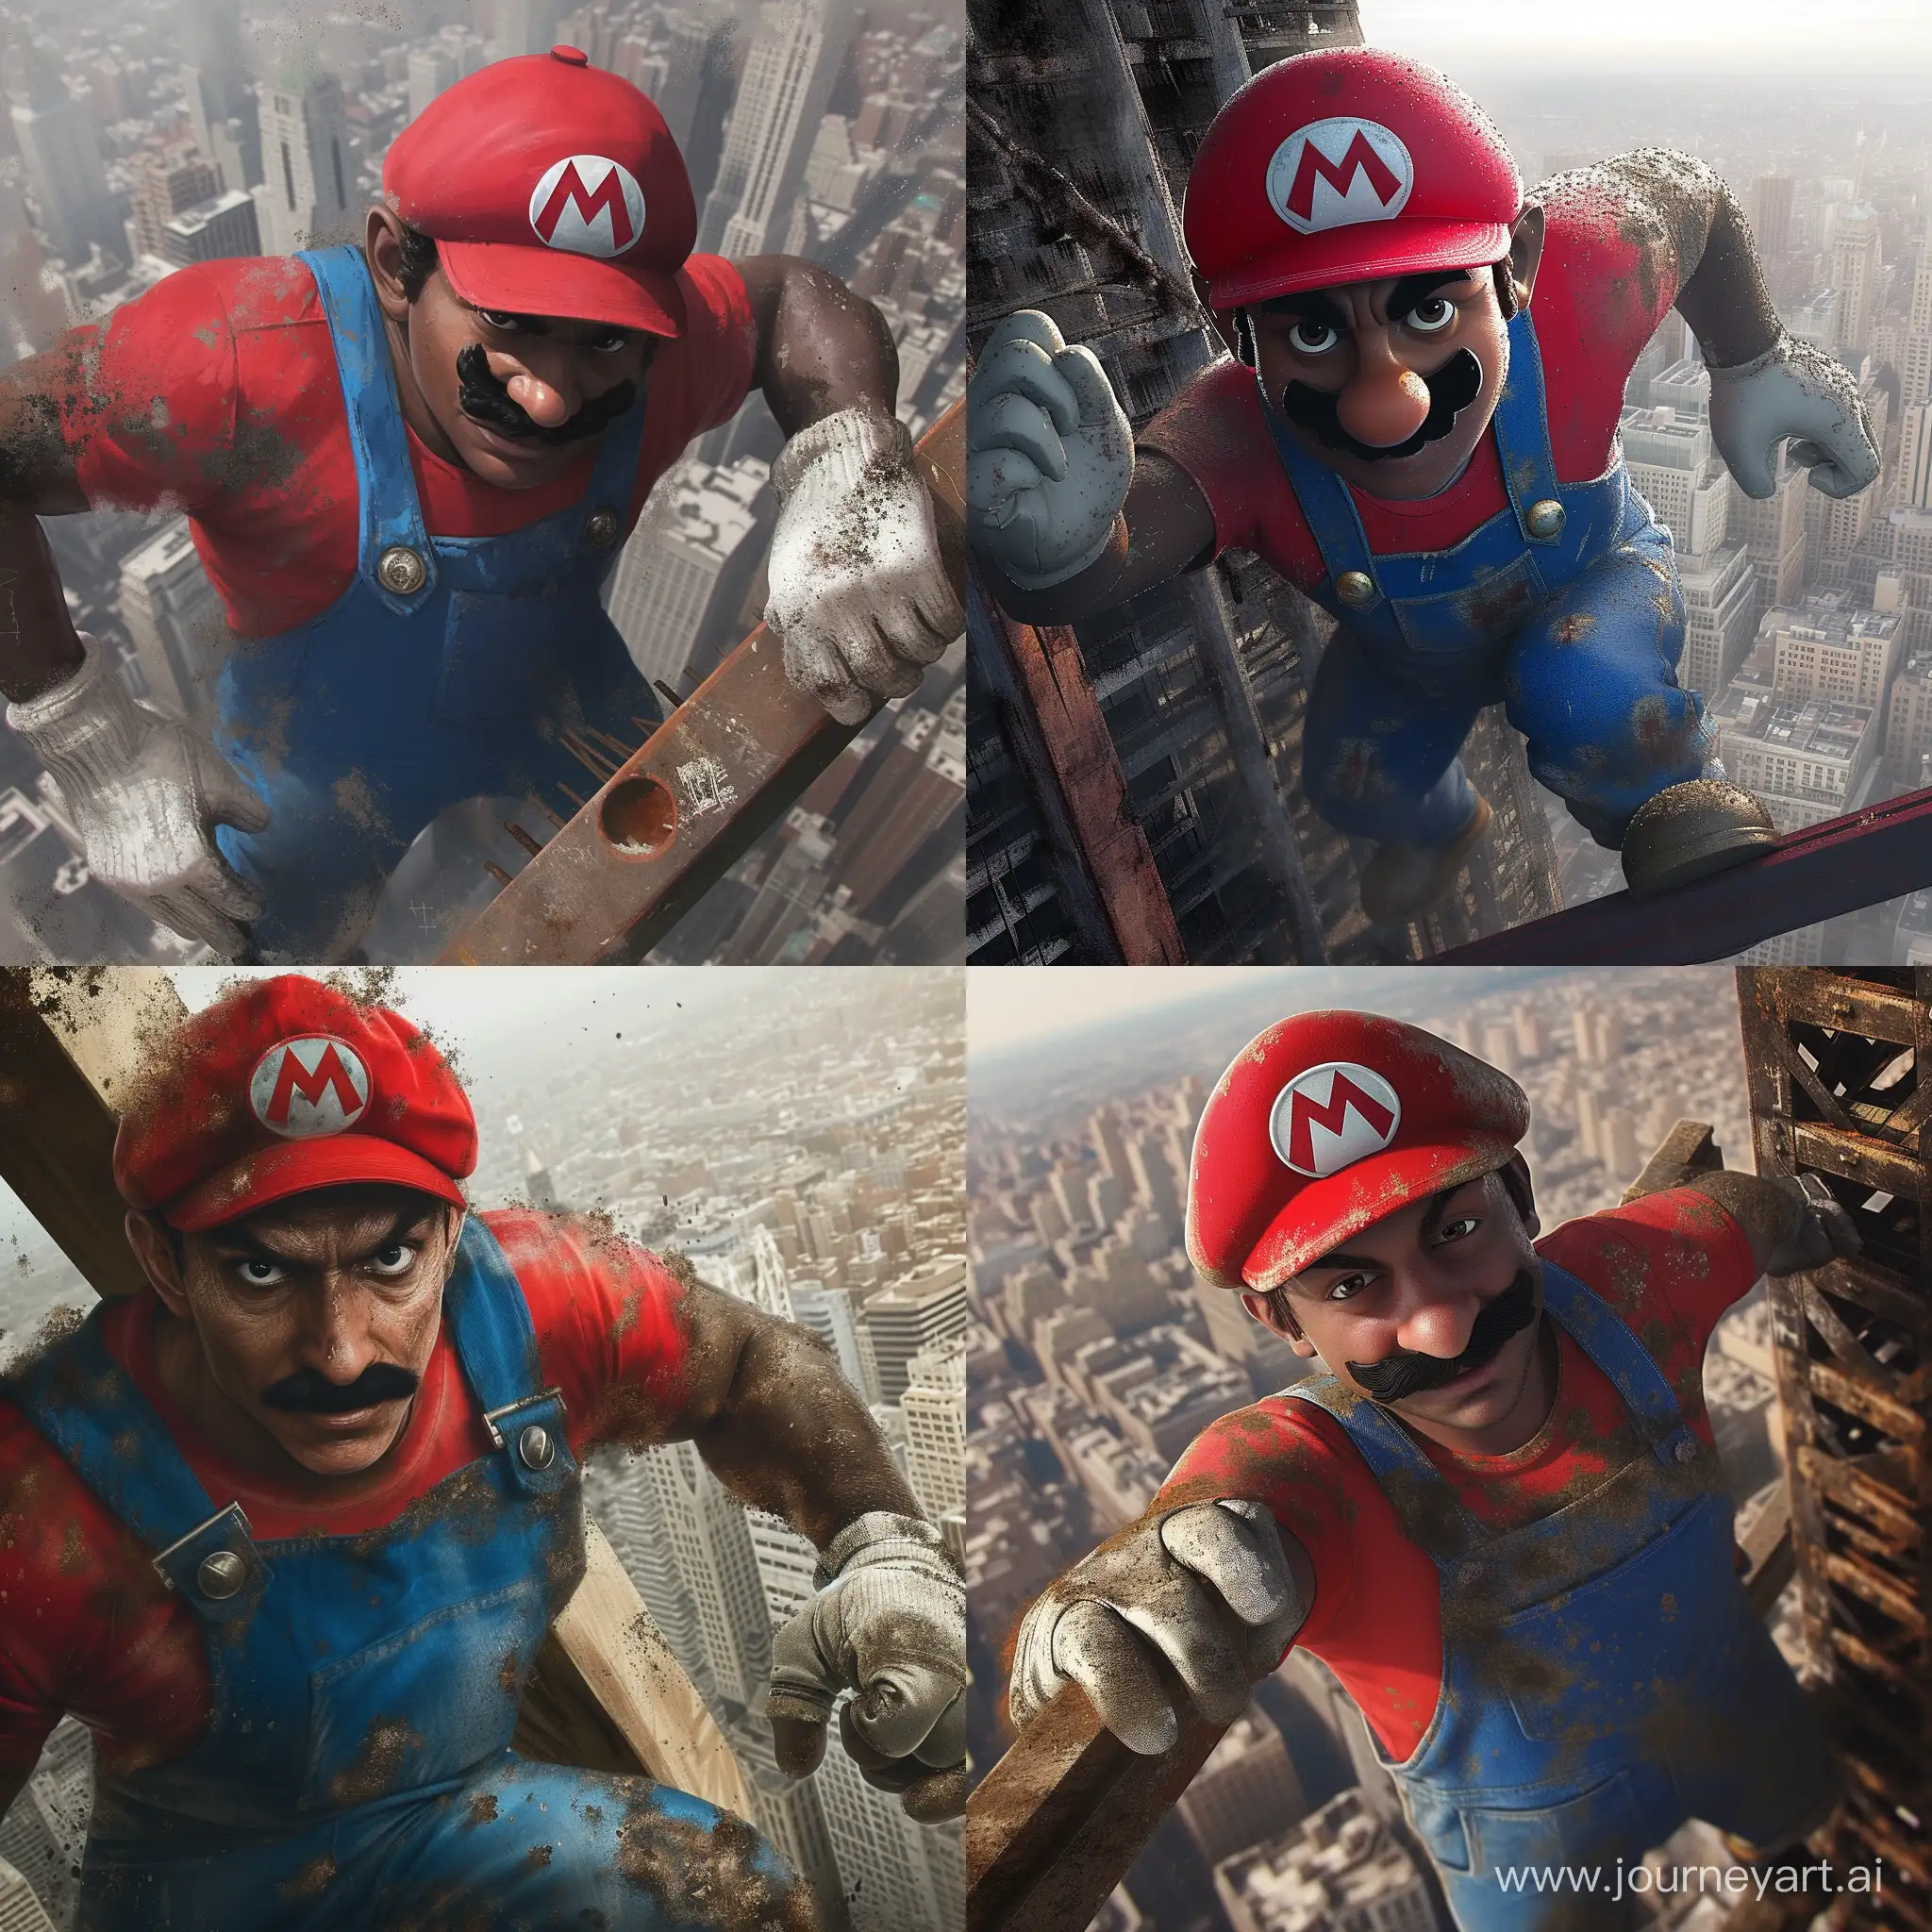 a creative, digitally-manipulated artwork of a character that seems inspired by the iconic video game will smith as character Mario from Nintendo's Mario series. However, unlike the traditional, whimsical portrayal of Mario, this depiction is more realistic and gritty.

The character maintains several of Mario's classic design elements, such as the red cap with the distinctive "M" symbol, the blue overalls, red shirt, white gloves, and the mustache. The character has a determined expression on his face and is looking directly at the viewer, which could imply a sense of readiness or challenge.

The setting of the image is a cityscape that is slightly out of focus in the background, suggesting a considerable height. The character is gripping a beam with one hand and seems like he could be engaged in some construction work, resembling the character's original background as a carpenter in the Donkey Kong arcade game.

Notably, the character has darker skin, which is a departure from the traditionally depicted Italian plumber Mario, making this image a unique and diverse interpretation of the character. The image is detailed with textures and wear, like dust and rust on the clothes and gloves, giving it a more rugged and mature theme.